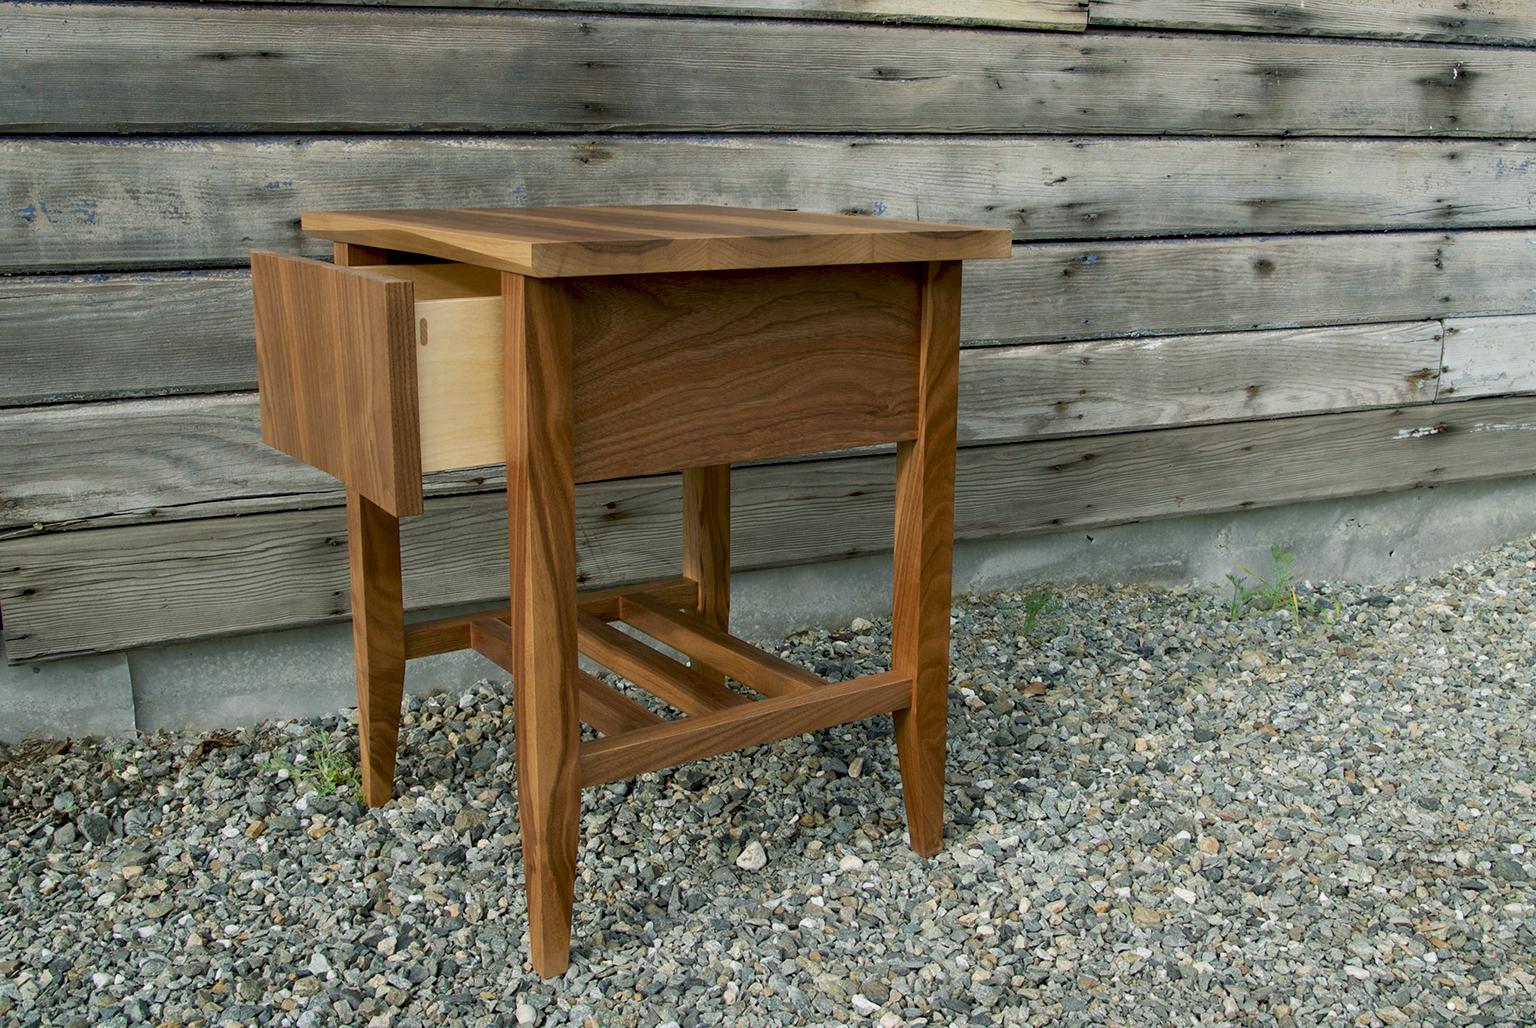 Modern, hardwood rift end table, nightstand storage bedside table. The bedside table features timeless lines, subtle tapers, a soft close drawer and a wooden under carriage for storage.

This listing is for a Rift bedside table in walnut.